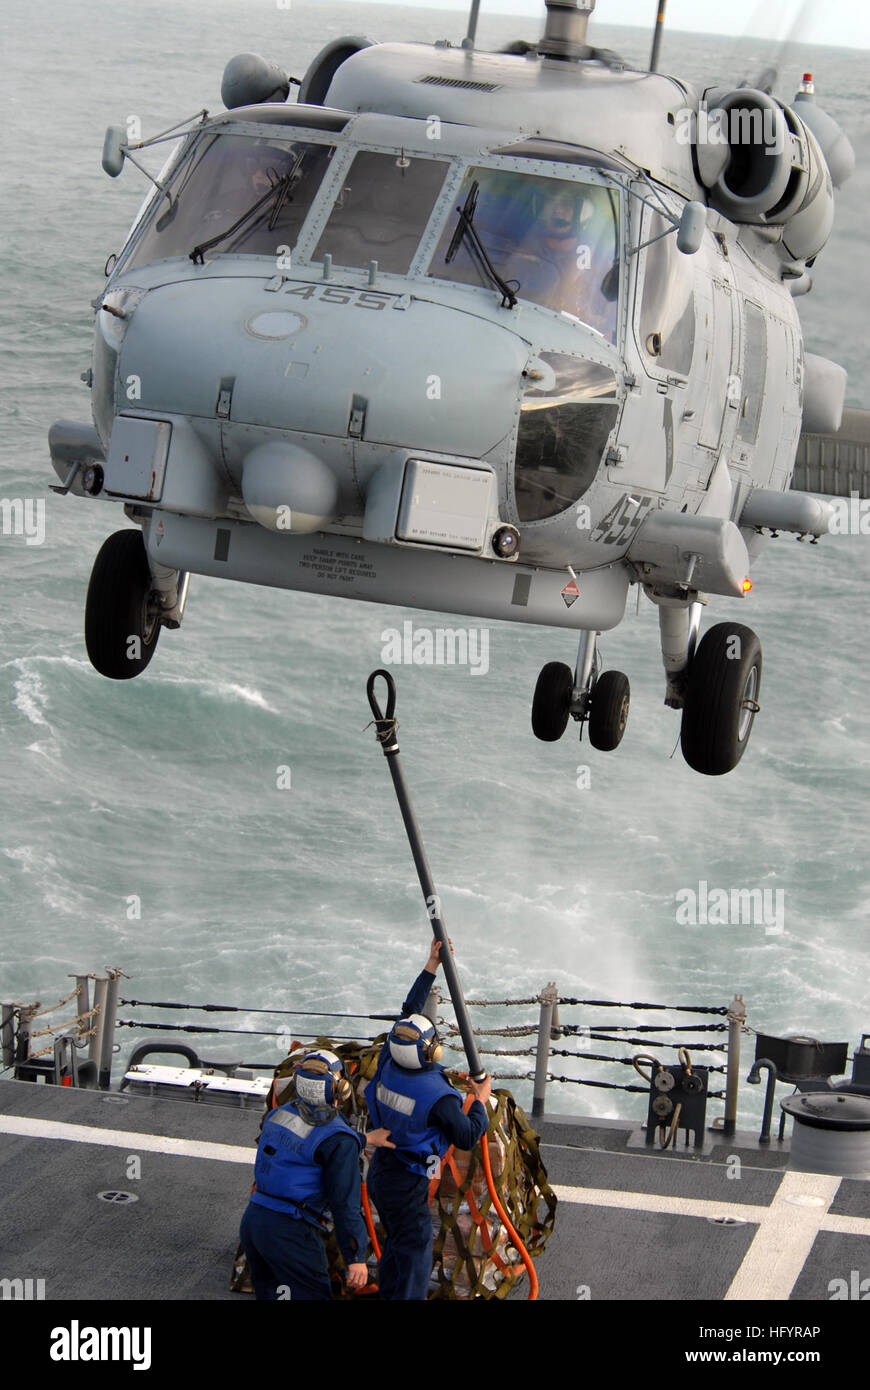 110510-N-ZI300-110 ATLANTIC OCEAN (May 10, 2011) Sailors aboard the guided-missile frigate USS Boone (FFG 28) attach a pallet of supplies to an SH-60B Sea hawk helicopter from the Swamp Fox of Anti-submarine Squadron (HSL) 44 during a vertical replenishment with the guided-missile frigate USS Thach (FFG 43). HSL-44 is embarked aboard Boone and deployed to South America to participate in Southern Seas 2011. (U.S. Navy photo by Mass Communication Specialist 1st Class Steve Smith/Released) US Navy 110510-N-ZI300-110 Sailors aboard USS Boone (FFG 28) attach a pallet of supplies to an SH-60B Sea ha Stock Photo